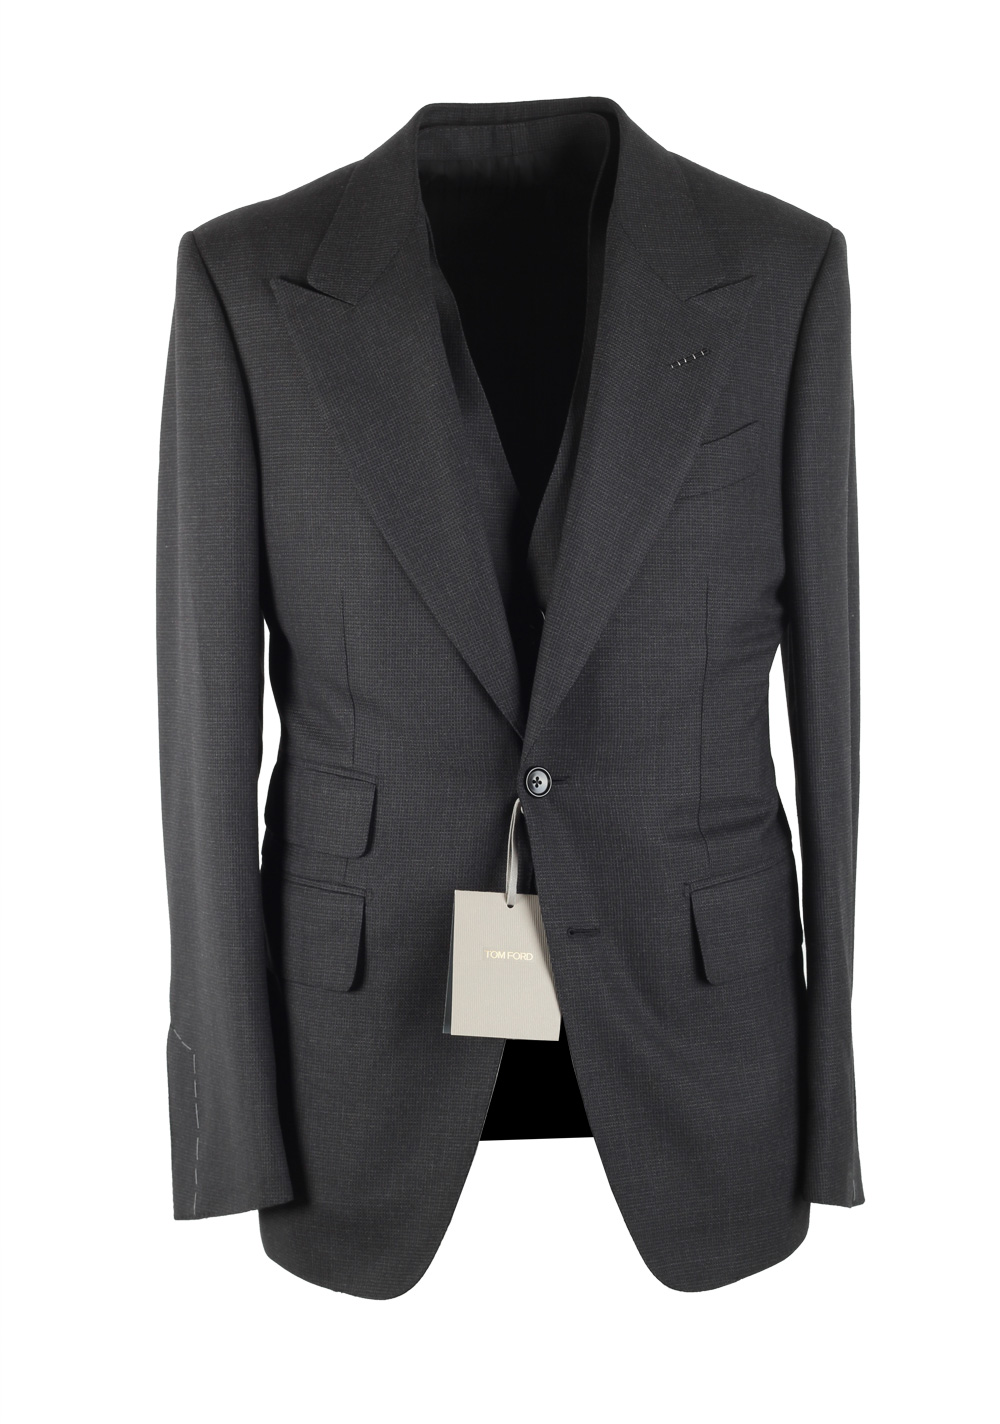 TOM FORD Shelton Gray 3 Piece Suit Size 46C / 36S U.S. Wool | Costume ...